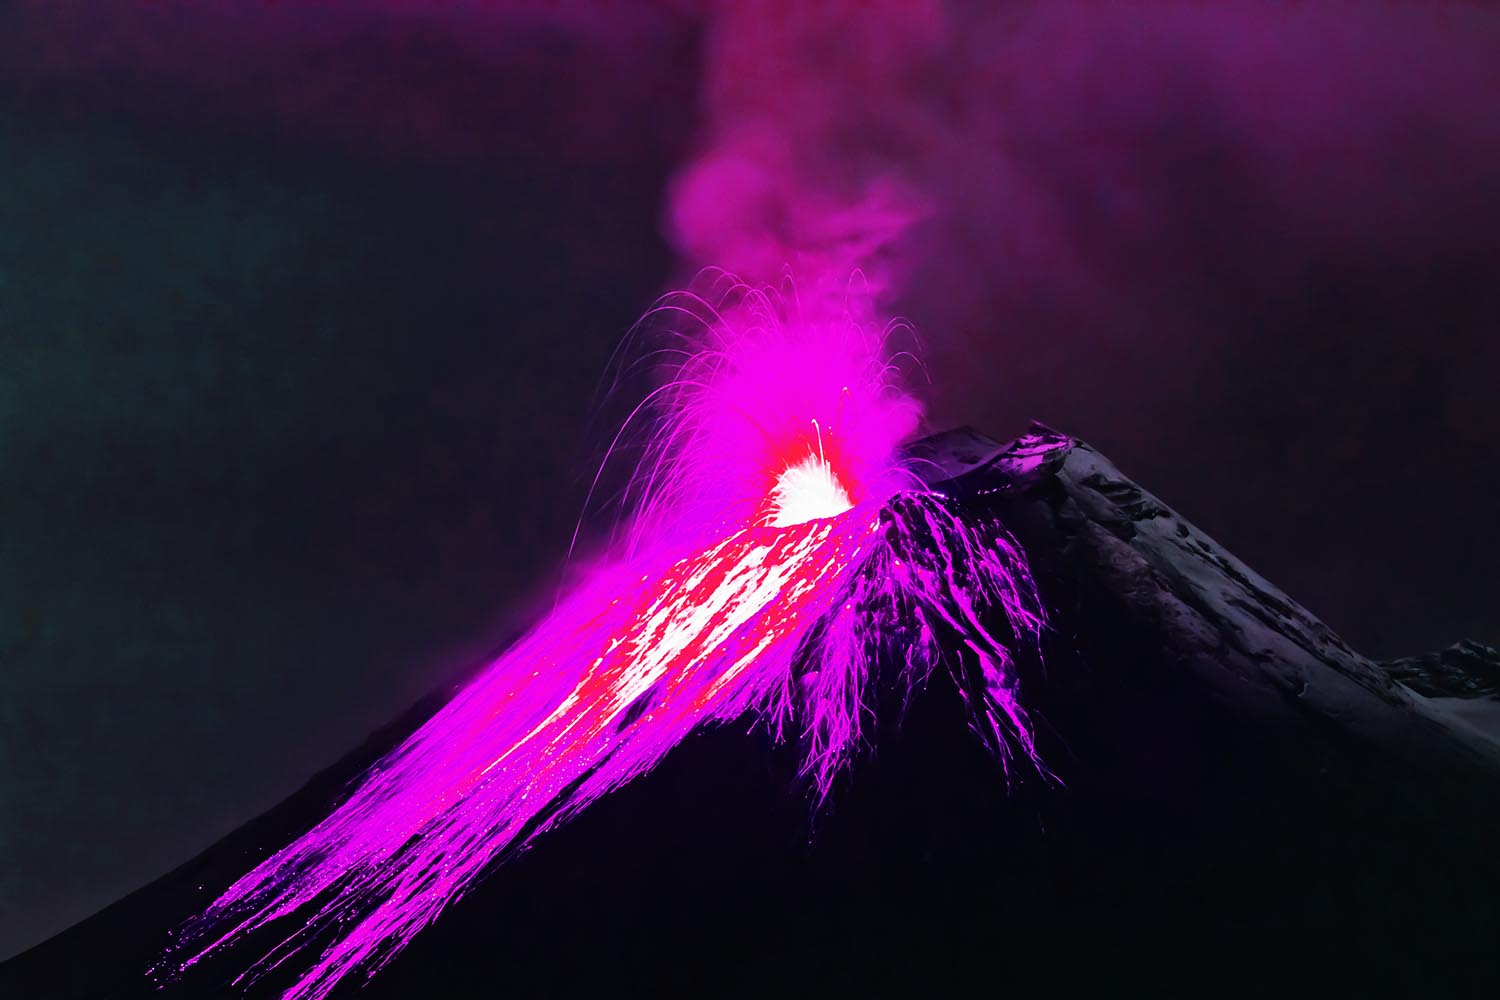 eruption of the volcano with molten lava - Clapway